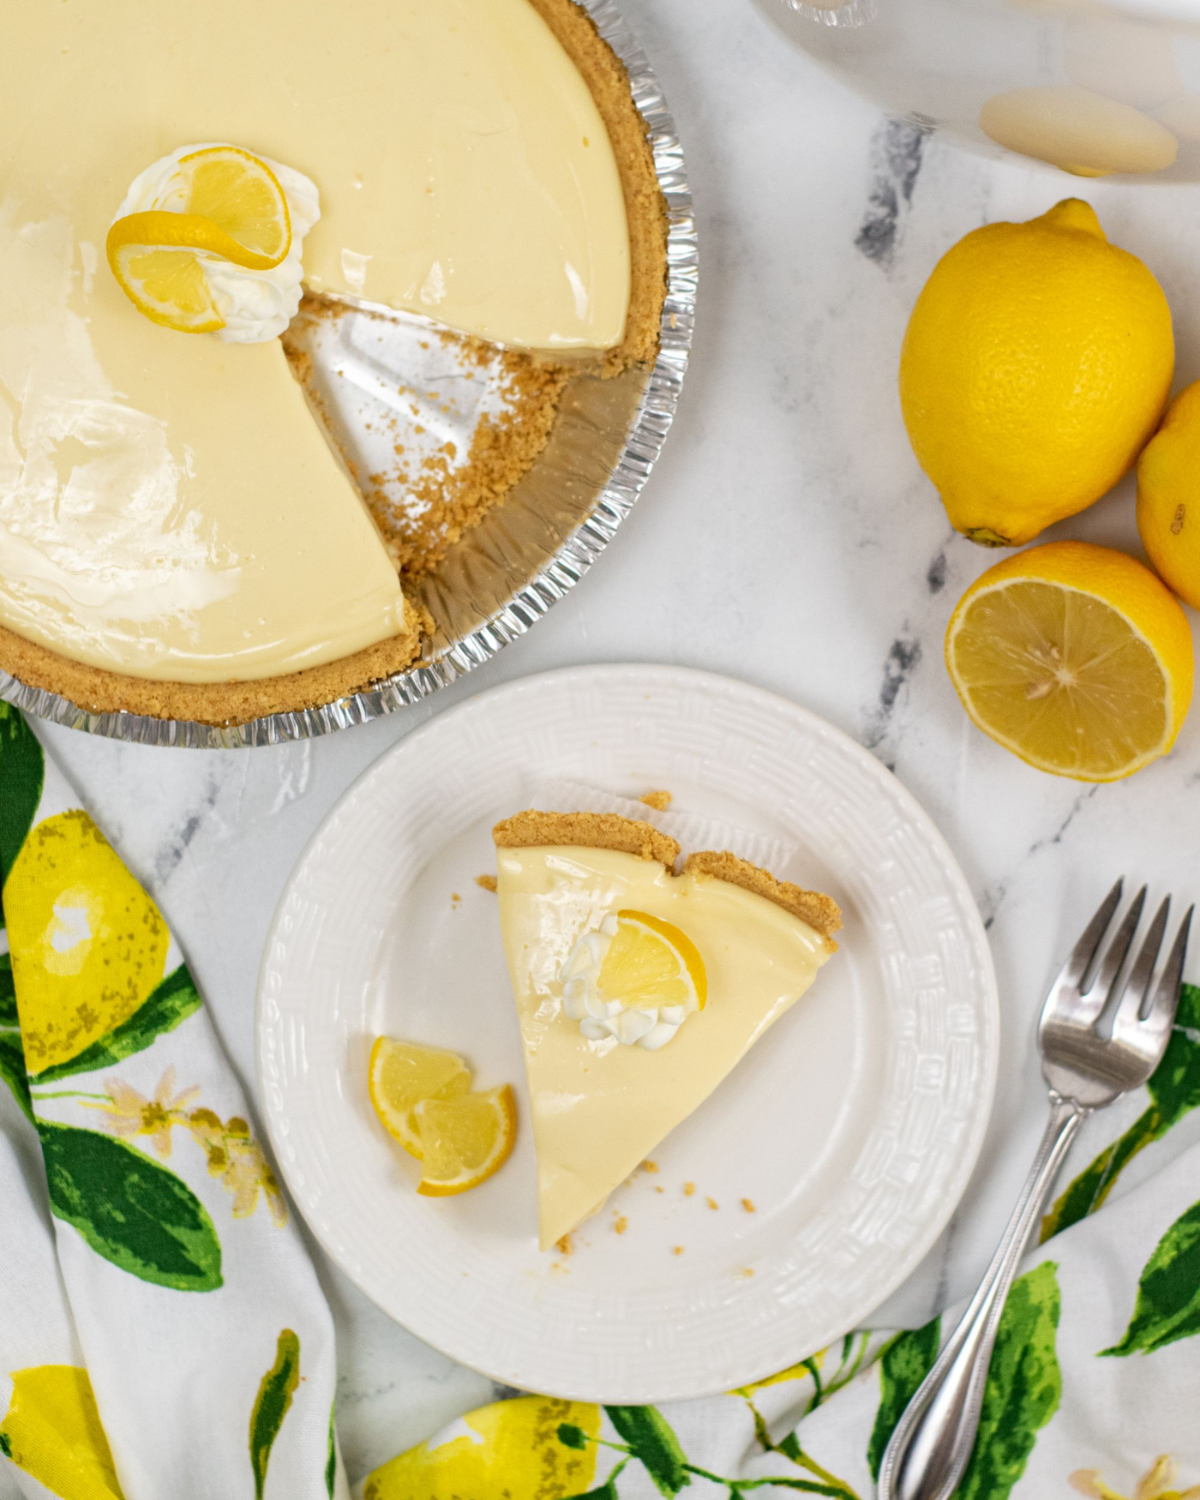 A slice of Lemon Icebox Pie served on a white plate with whole lemons and a pie in the background.